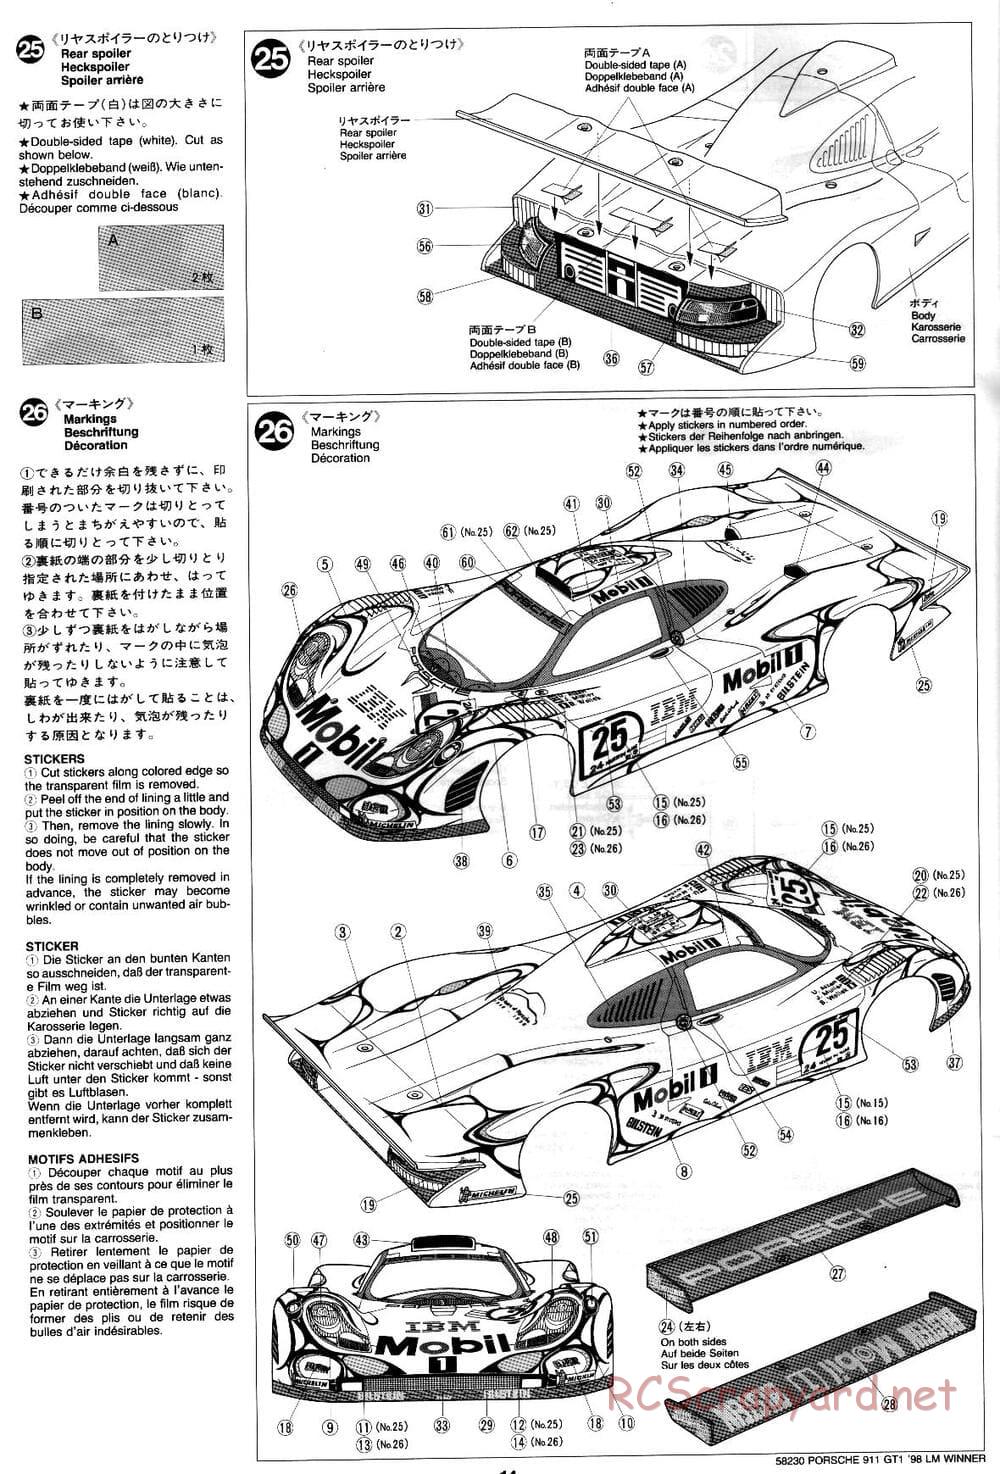 Tamiya - Porsche 911 GT1 98 LM Winner - F103RS Chassis - Manual - Page 14